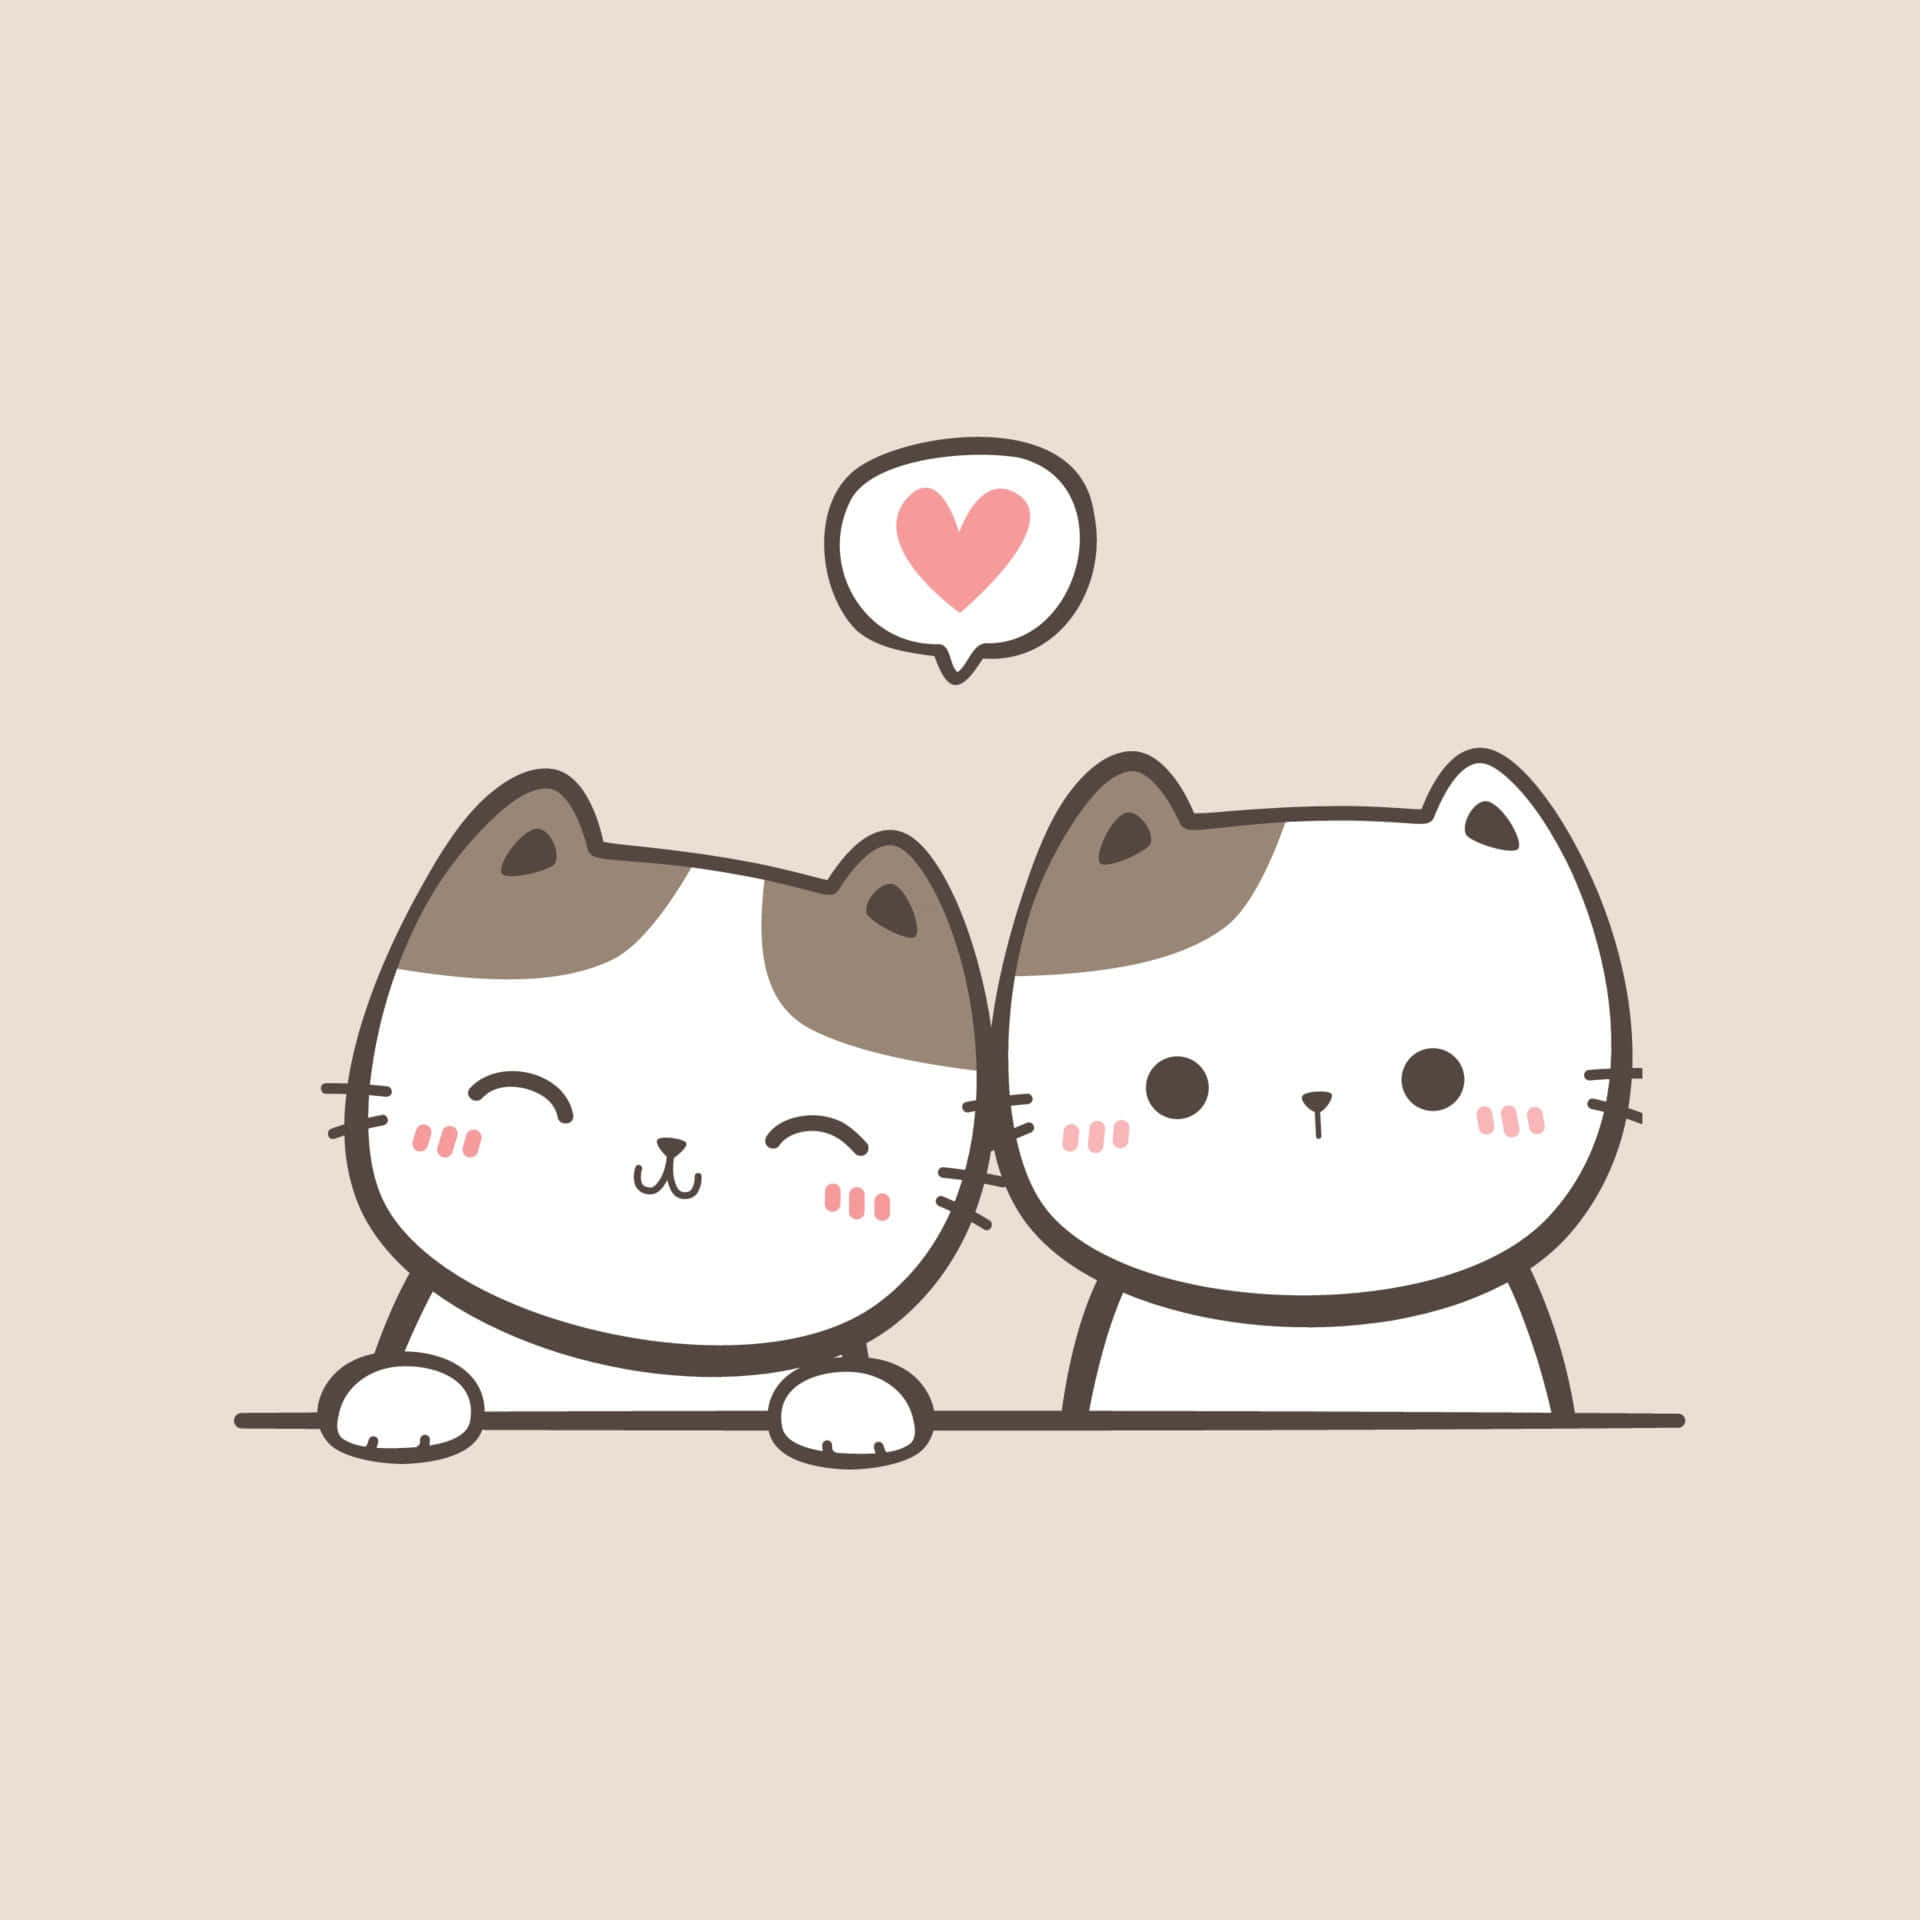 Matching cat icon profile pictures for couples